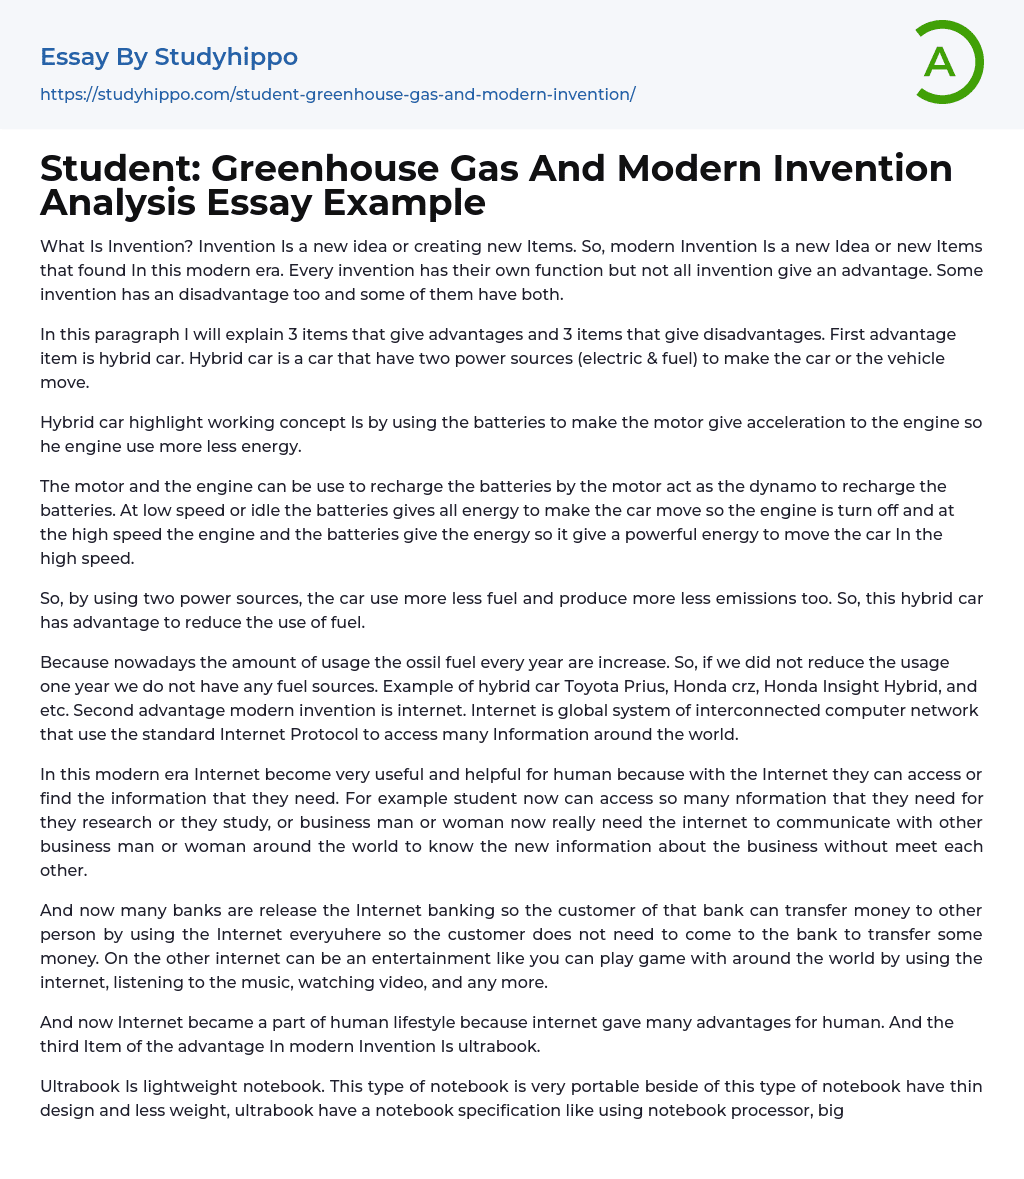 Student: Greenhouse Gas And Modern Invention Analysis Essay Example